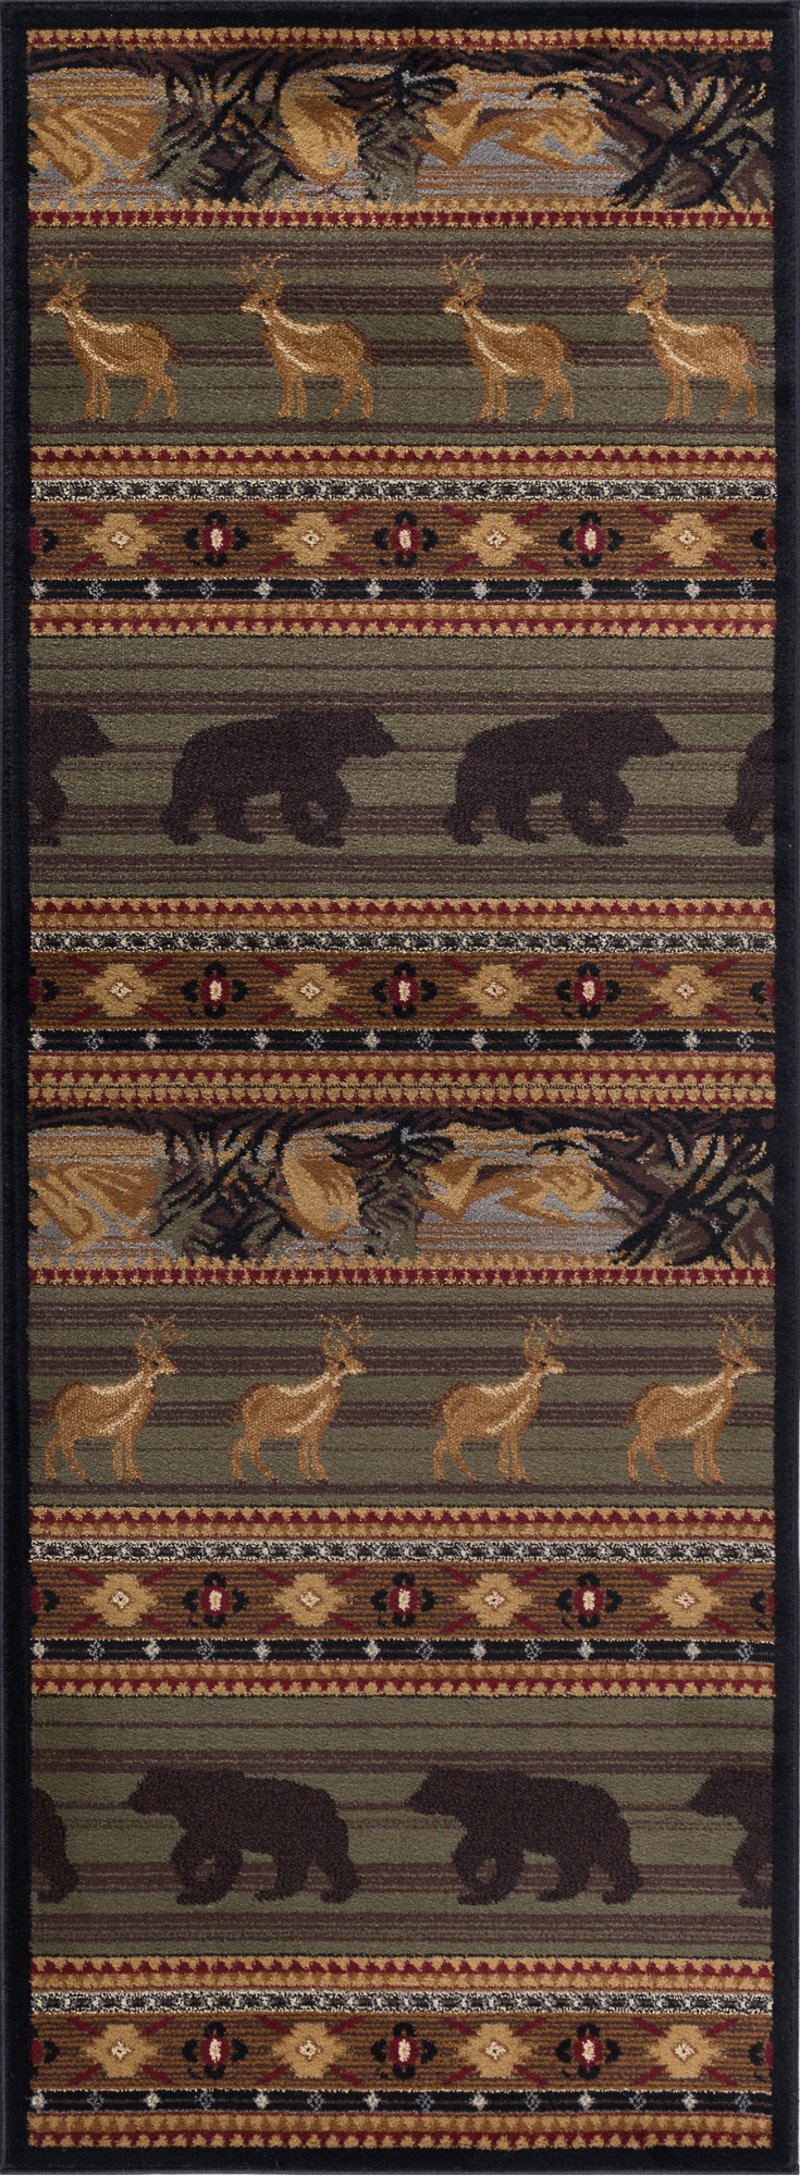 Green Brown And Tan 8 Foot Runner Rug Nature Rc Willey